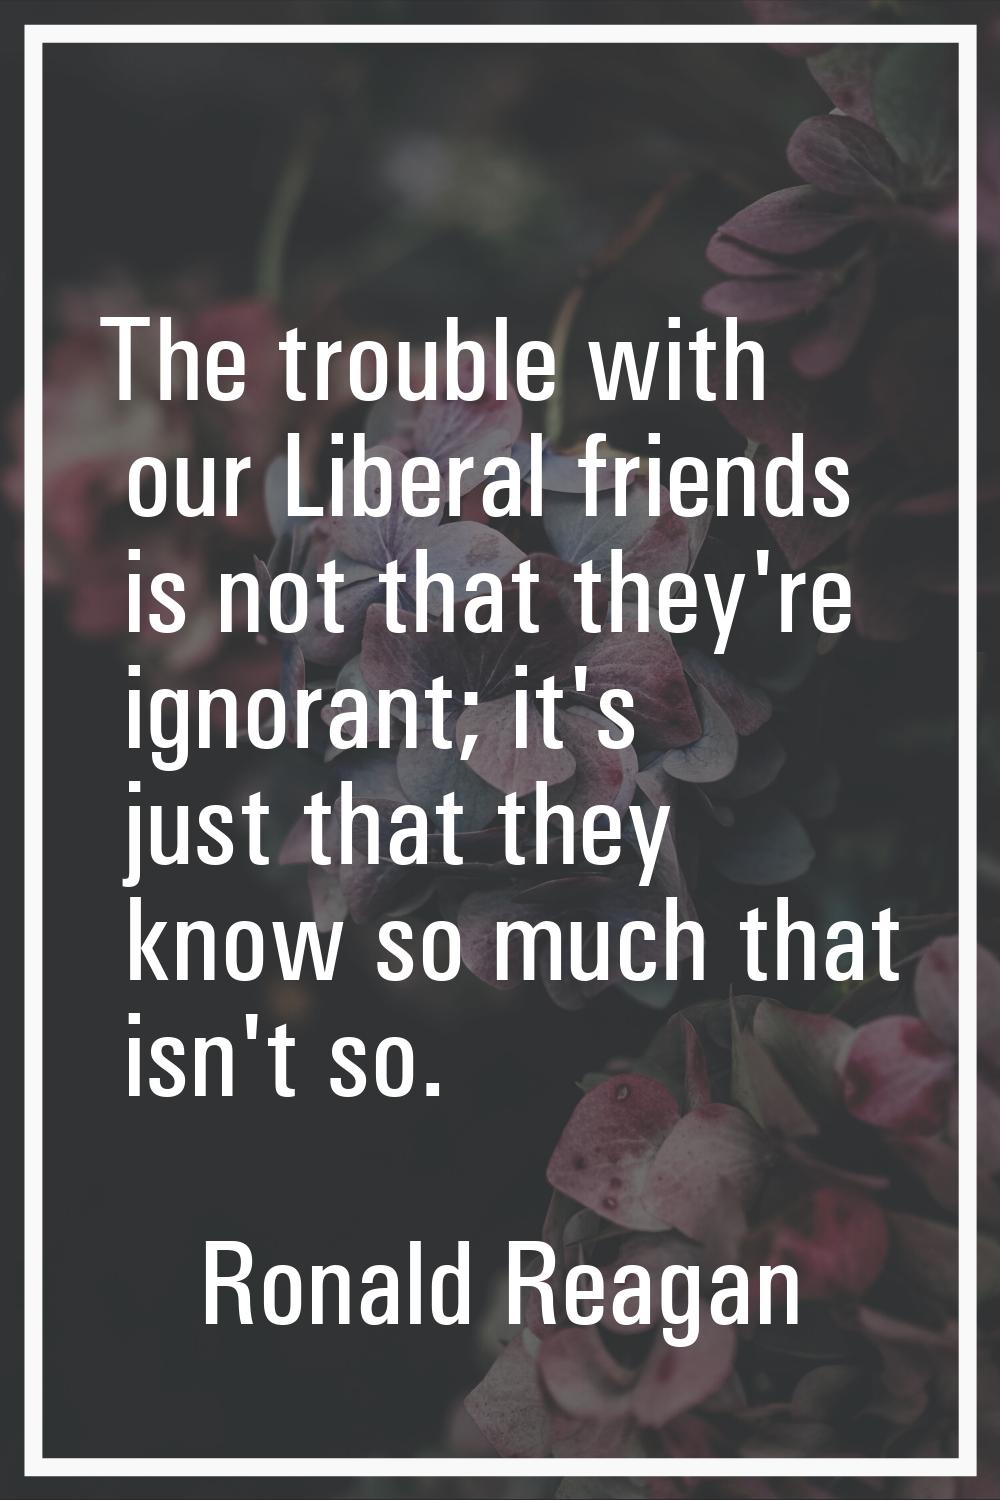 The trouble with our Liberal friends is not that they're ignorant; it's just that they know so much